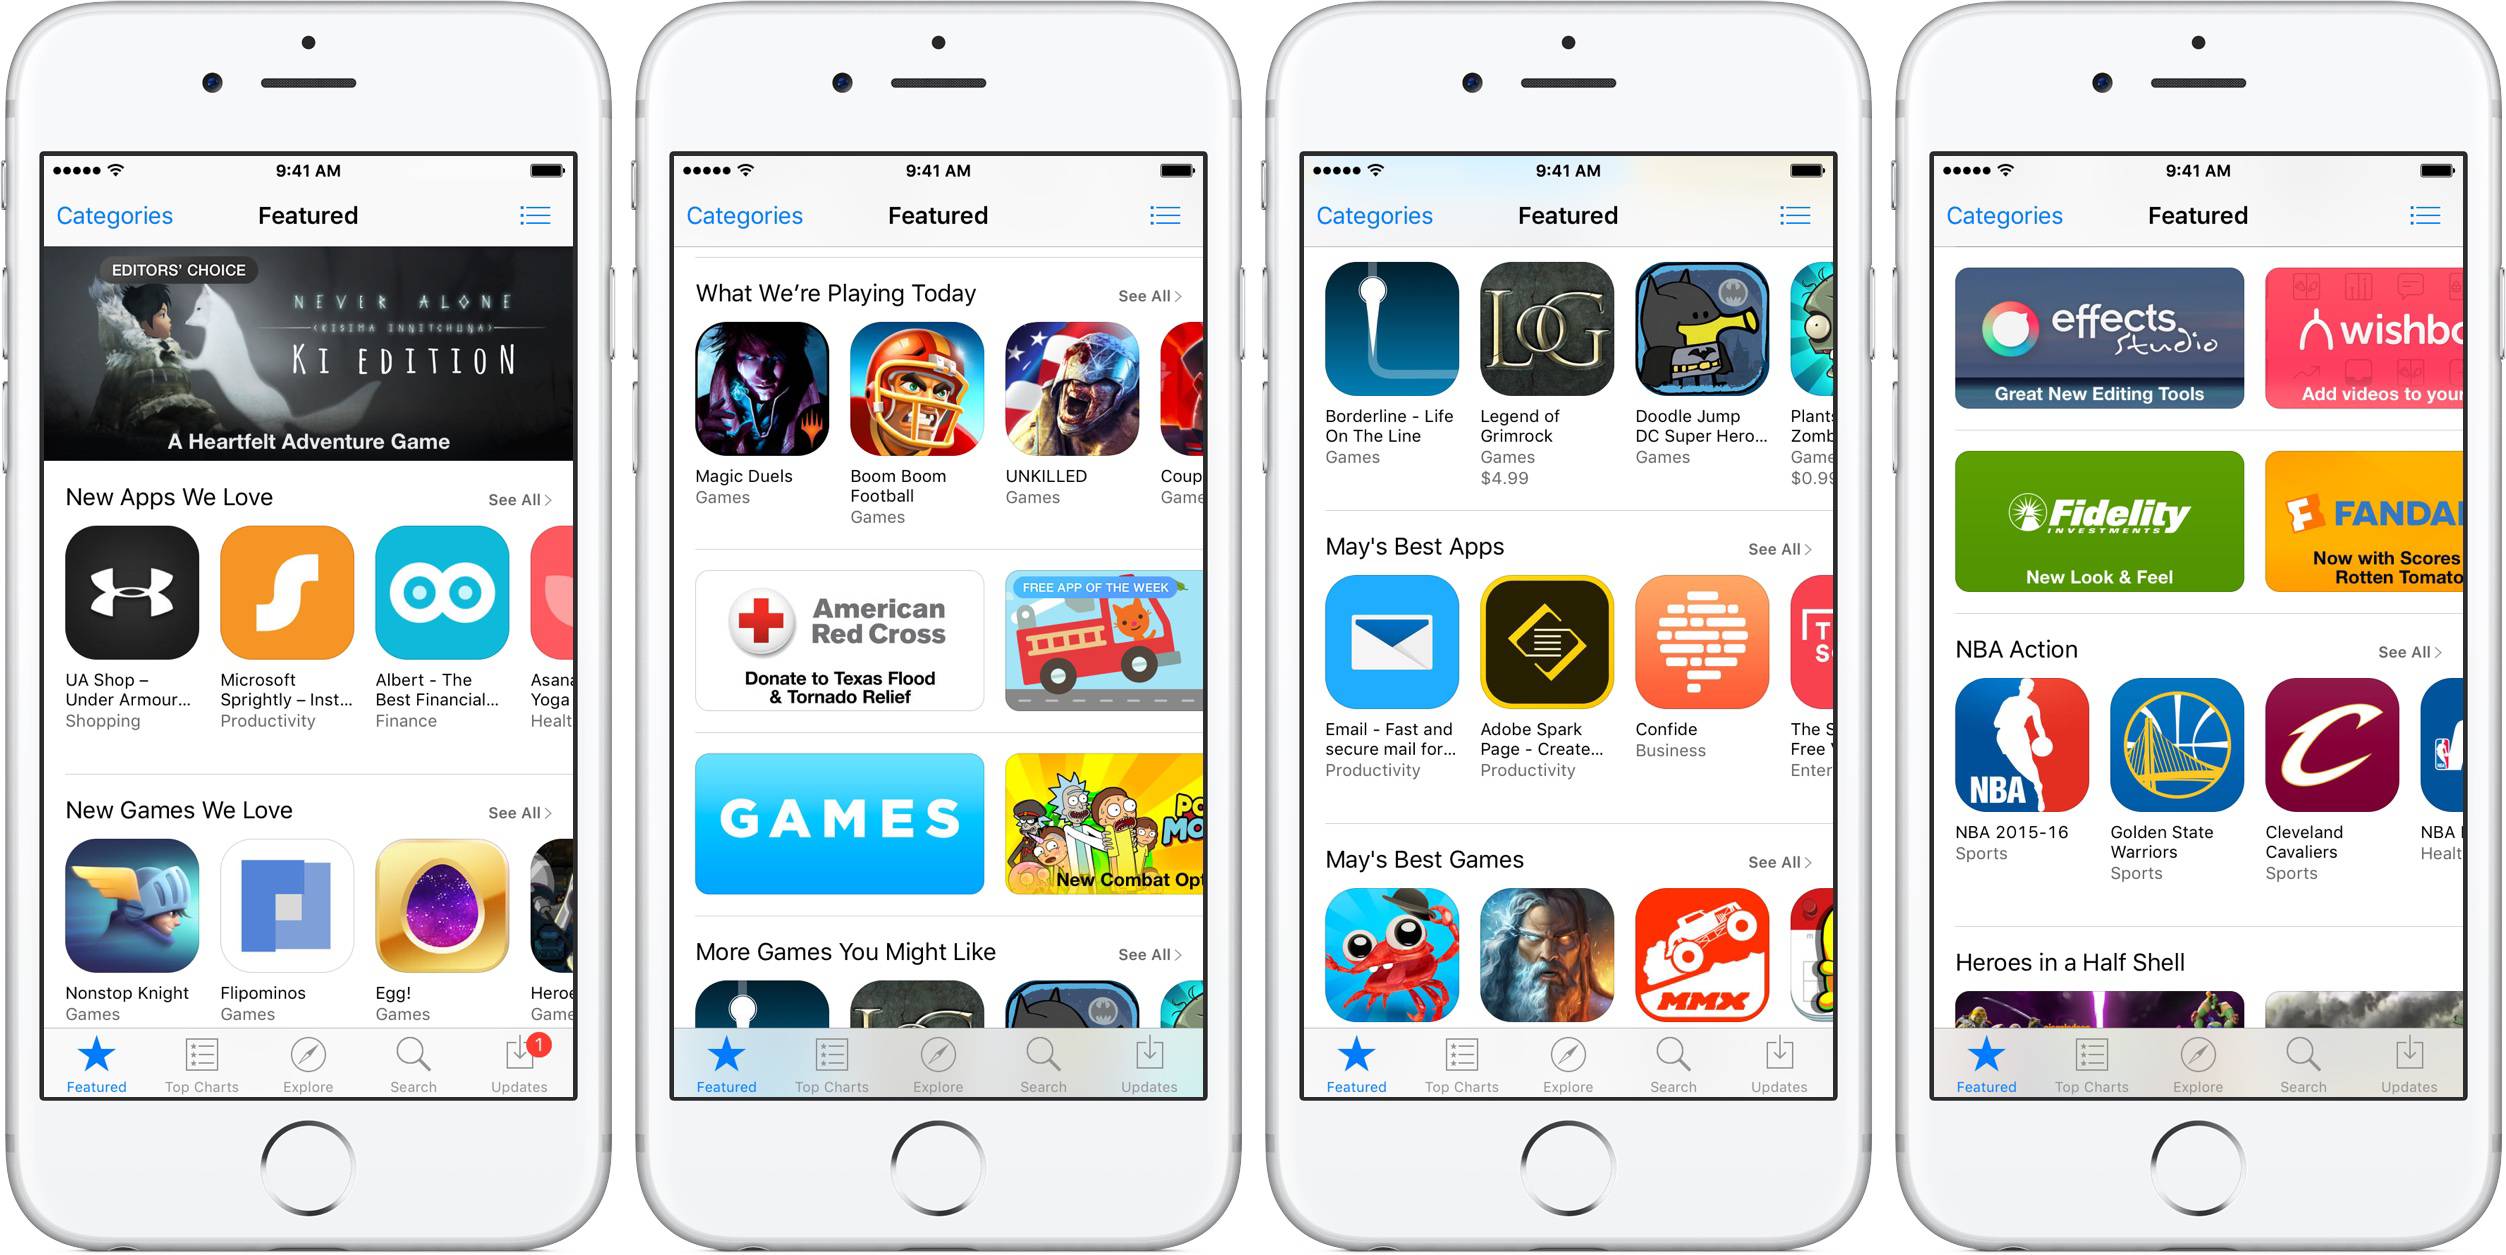 How To Get Your App Featured On The App Store - PreApps